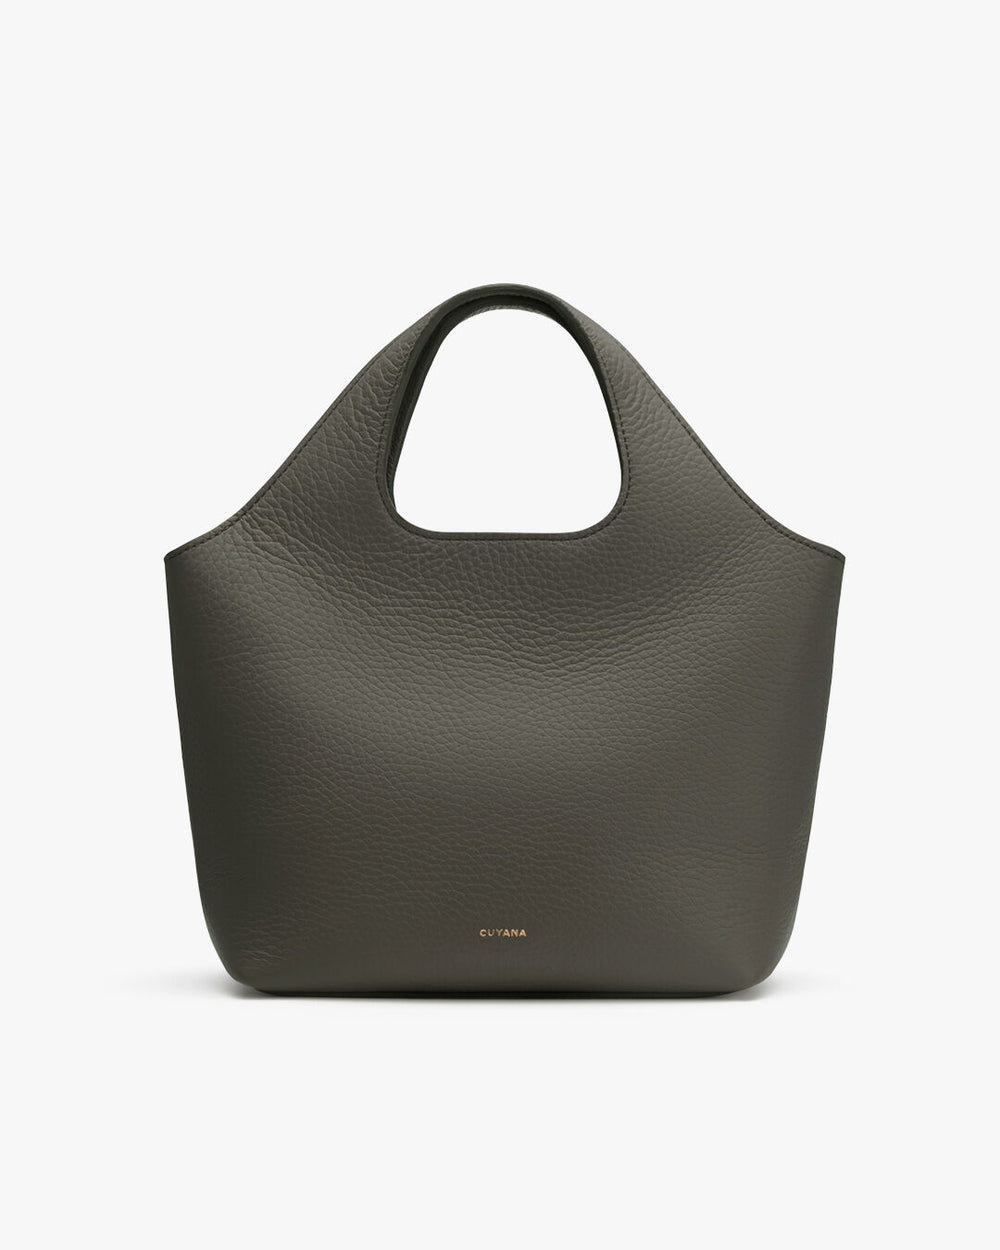 Handbag with a single handle and brand logo on the front.